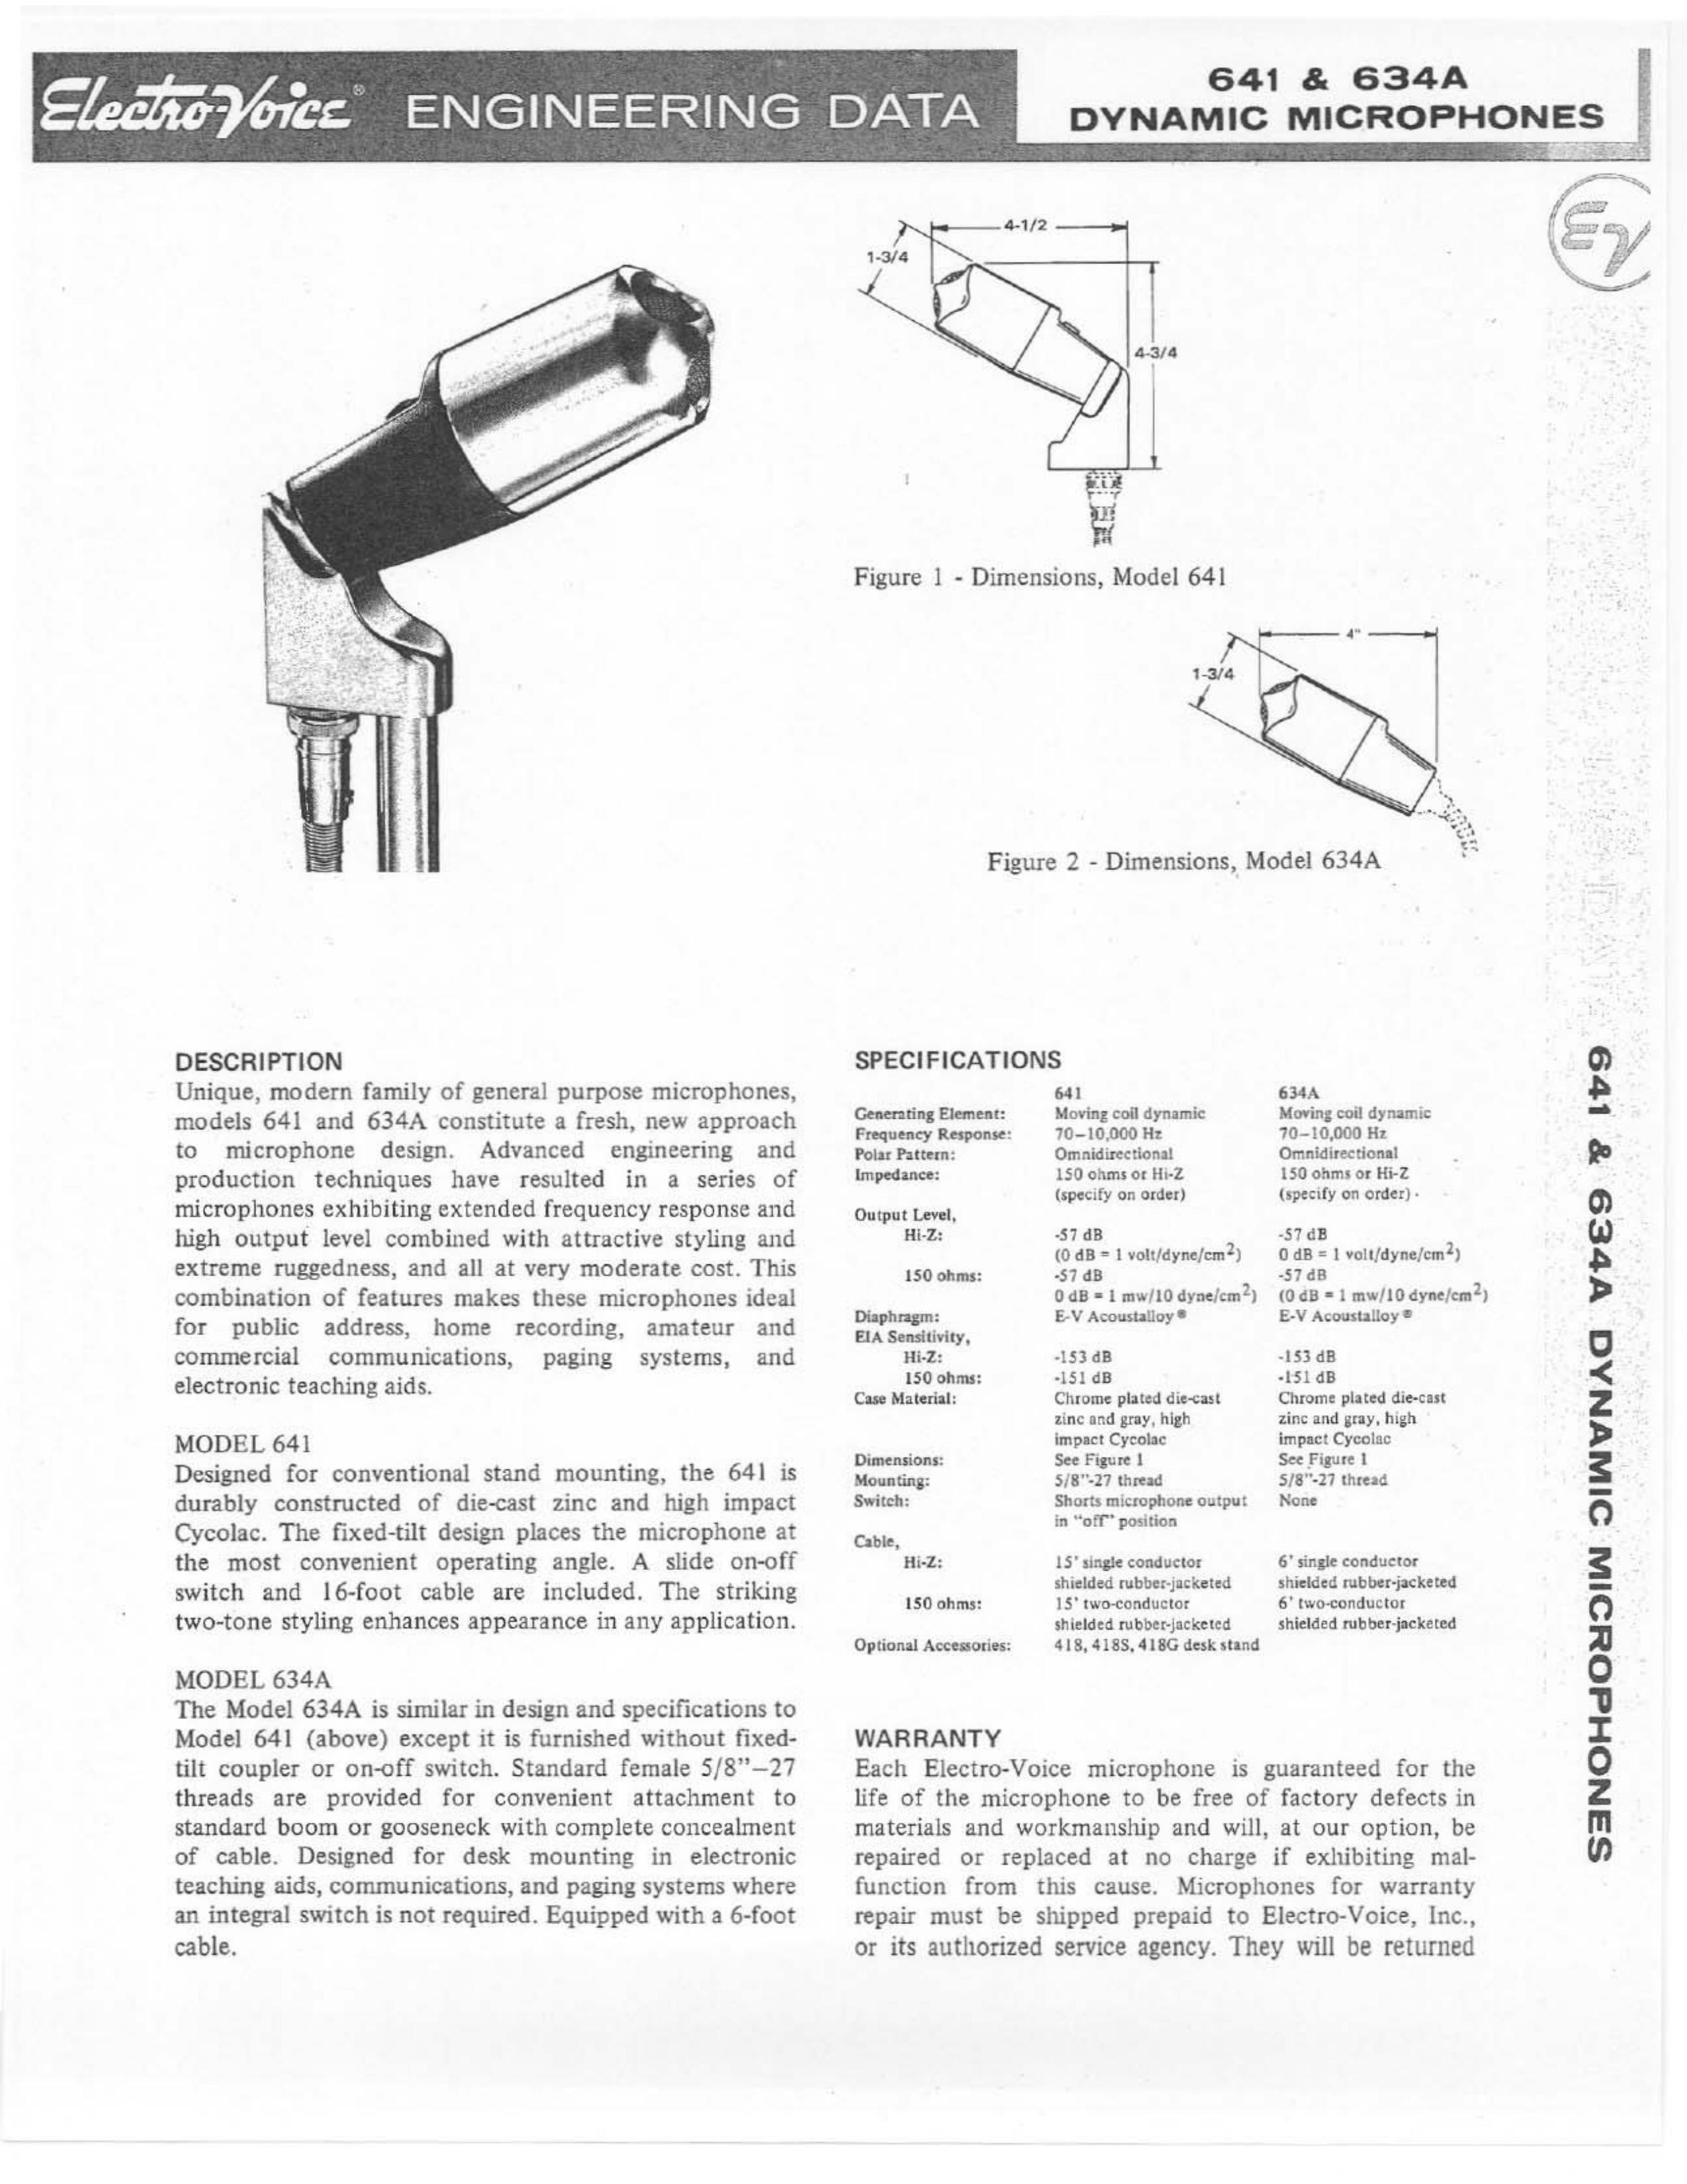 Electro-Voice 641 Microphone User Manual